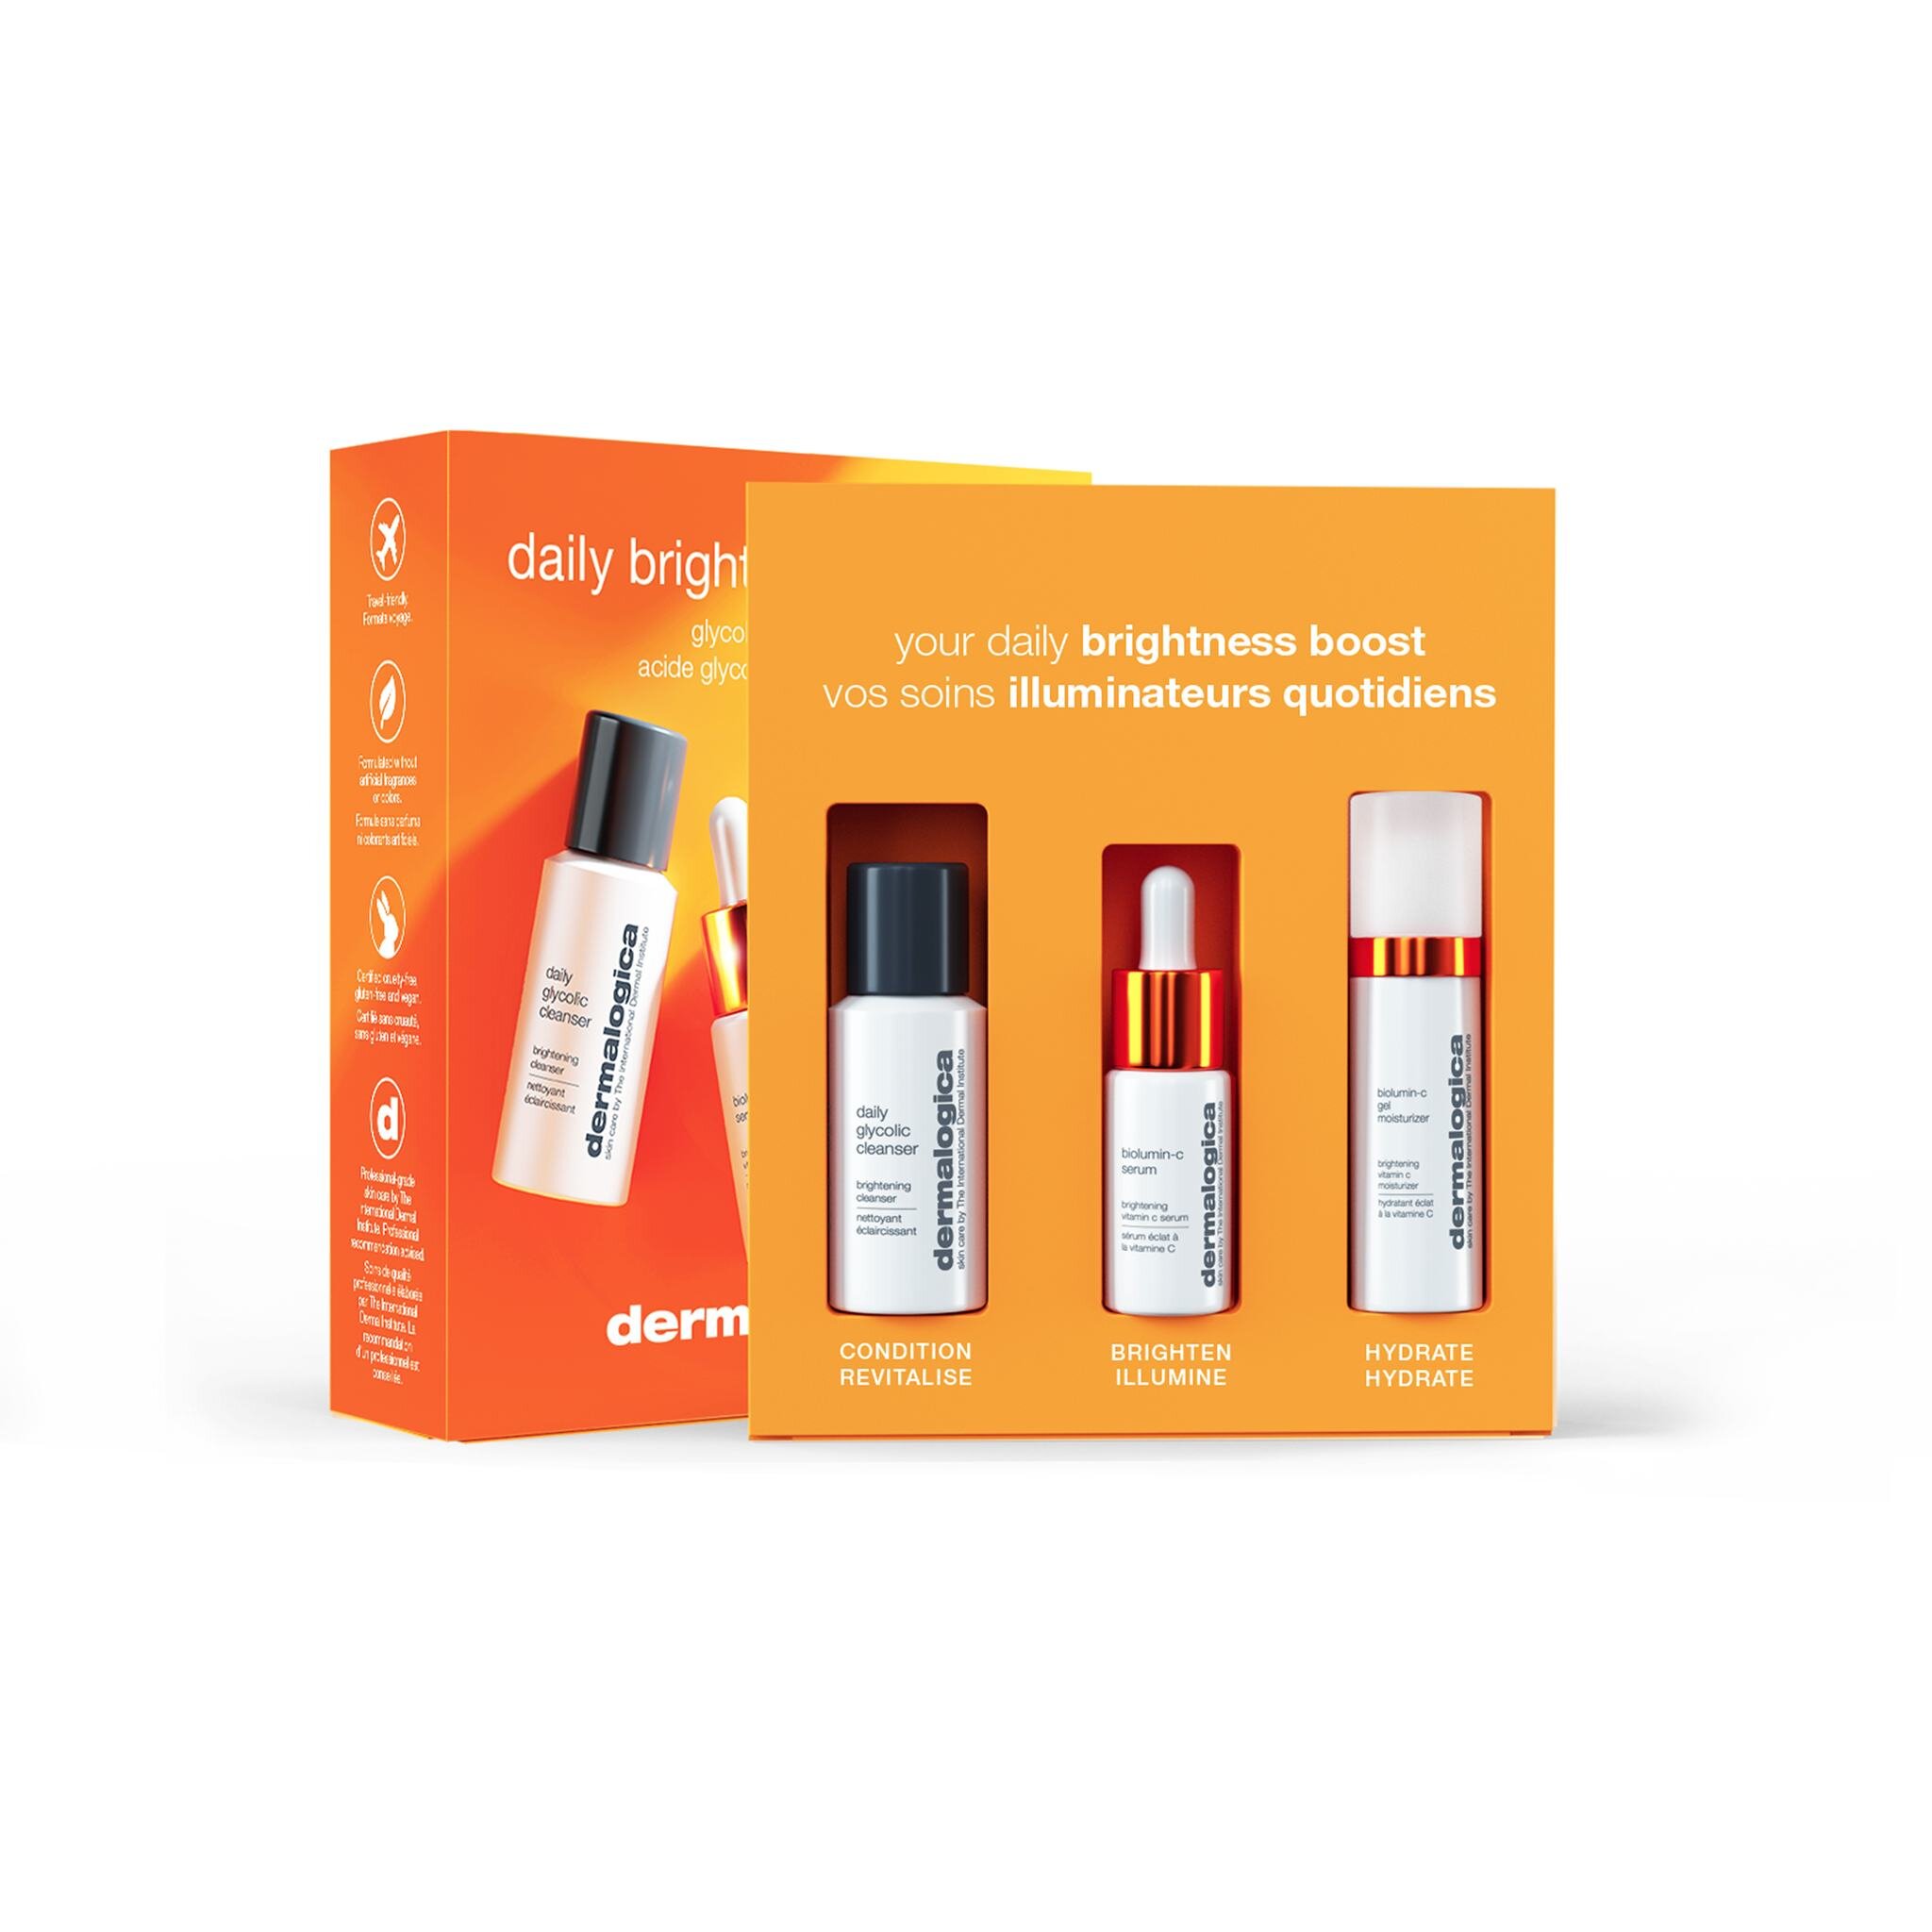 Dermalogica Daily Brightness Boosters Kit 🥰

This kit from Dermalogica will help Brighten, Condition and Hydrate your skin for a radiance boost.
Includes Daily Glycolic Cleanser, Biolumin-C Serum and Biolumin-C Moisturizer.
These products are the pe